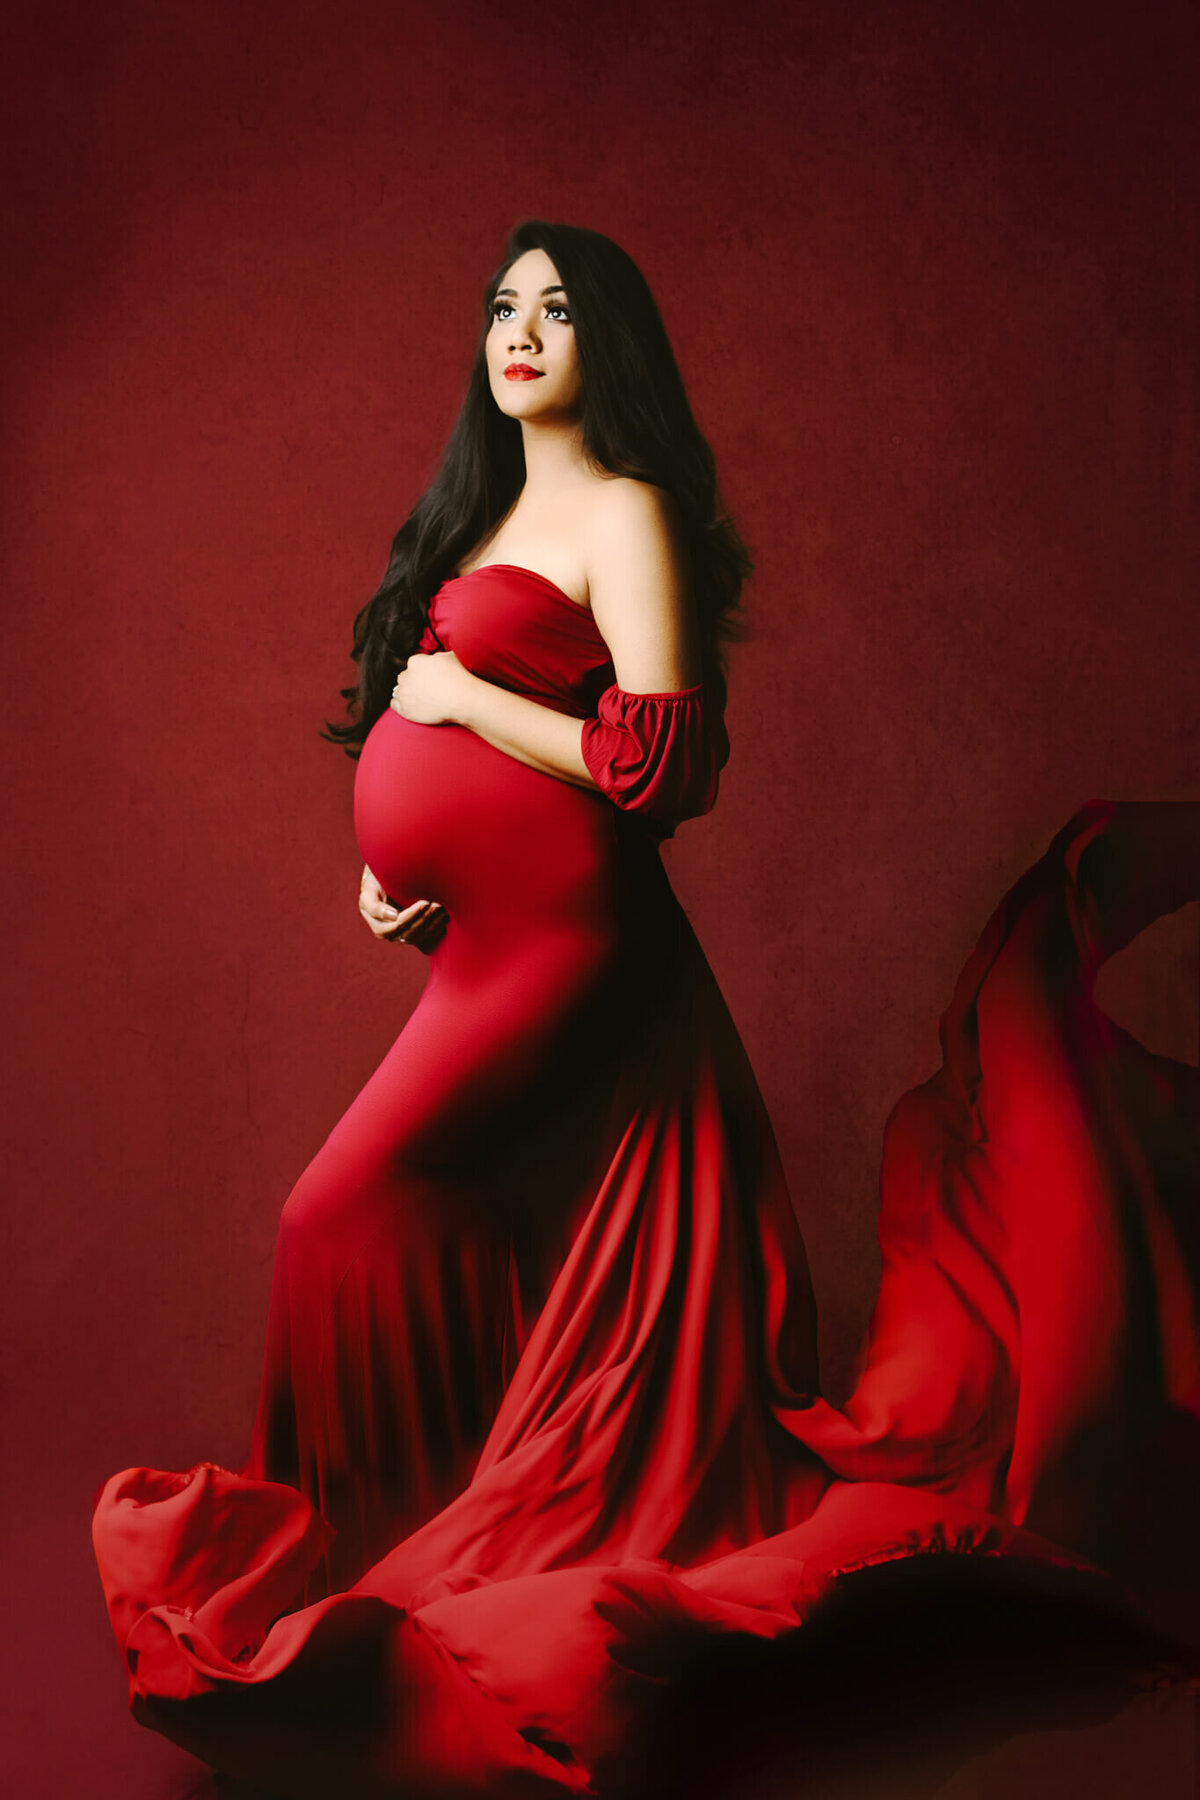 hamilton, On maternity studio poses expecting mother in red dress